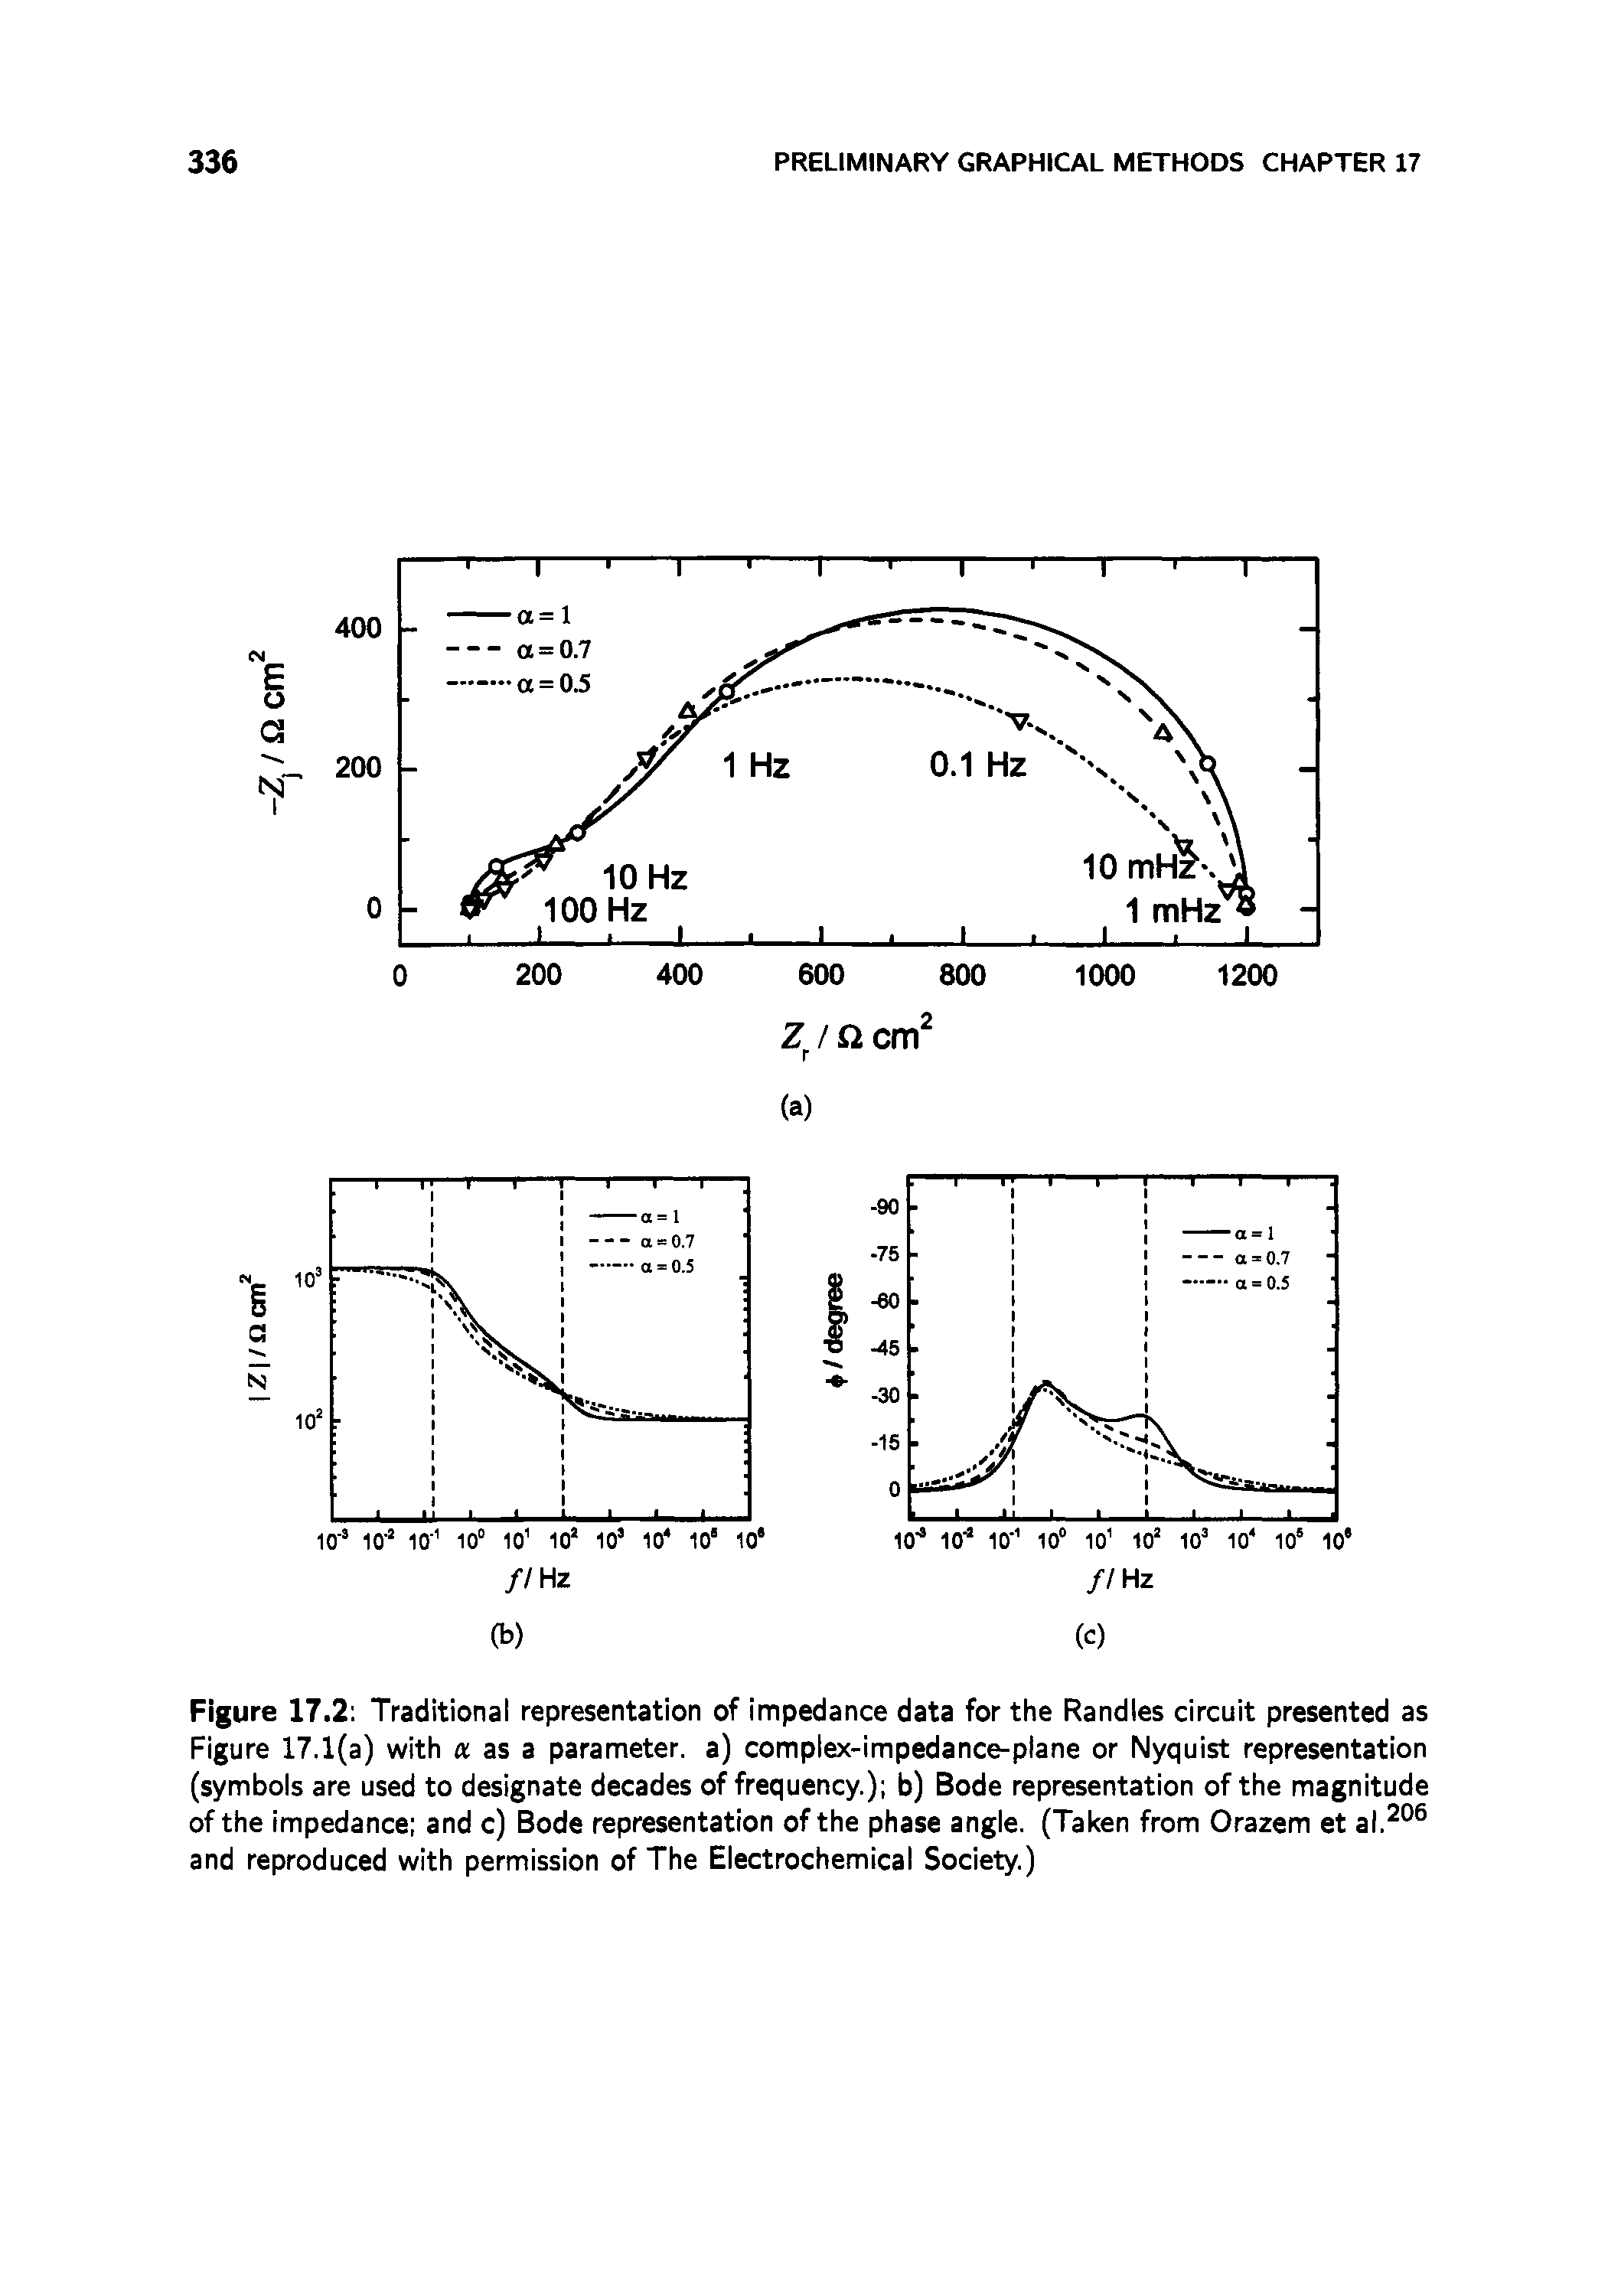 Figure 17.2 Traditional representation of impedance data for the Randles circuit presented as Figure 17.1(a) with a as a parameter, a) complex-impedance-plane or Nyquist representation (symbols are used to designate decades of frequency.) b) Bode representation of the magnitude of the impedance and c) Bode representation of the phase angle. (Taken from Orazem et al. ° and reproduced with permission of The Electrochemical Society.)...